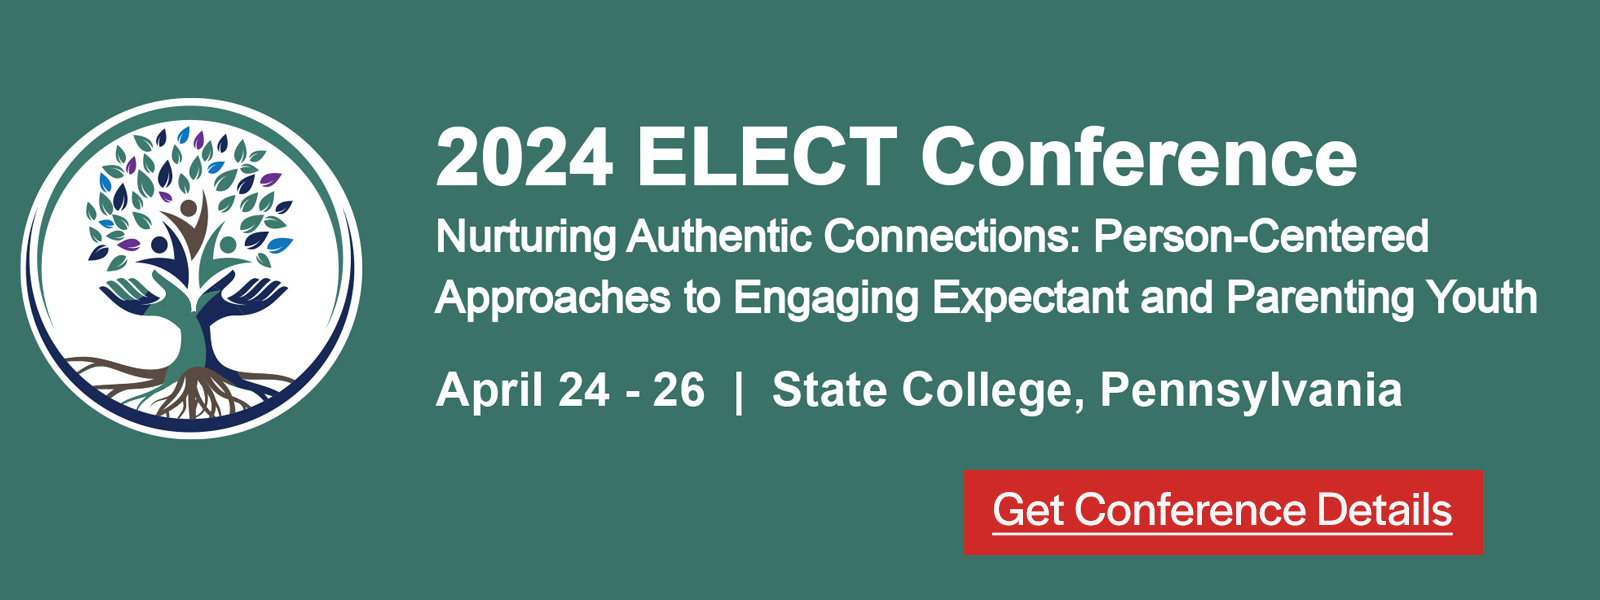 Click to get details for 2024 ELECT Conference. Nurturing authentic connections: Person-Centered approaches to engaging expectant and parenting youth. April 24 through 26 in State College, Pennsylvania.